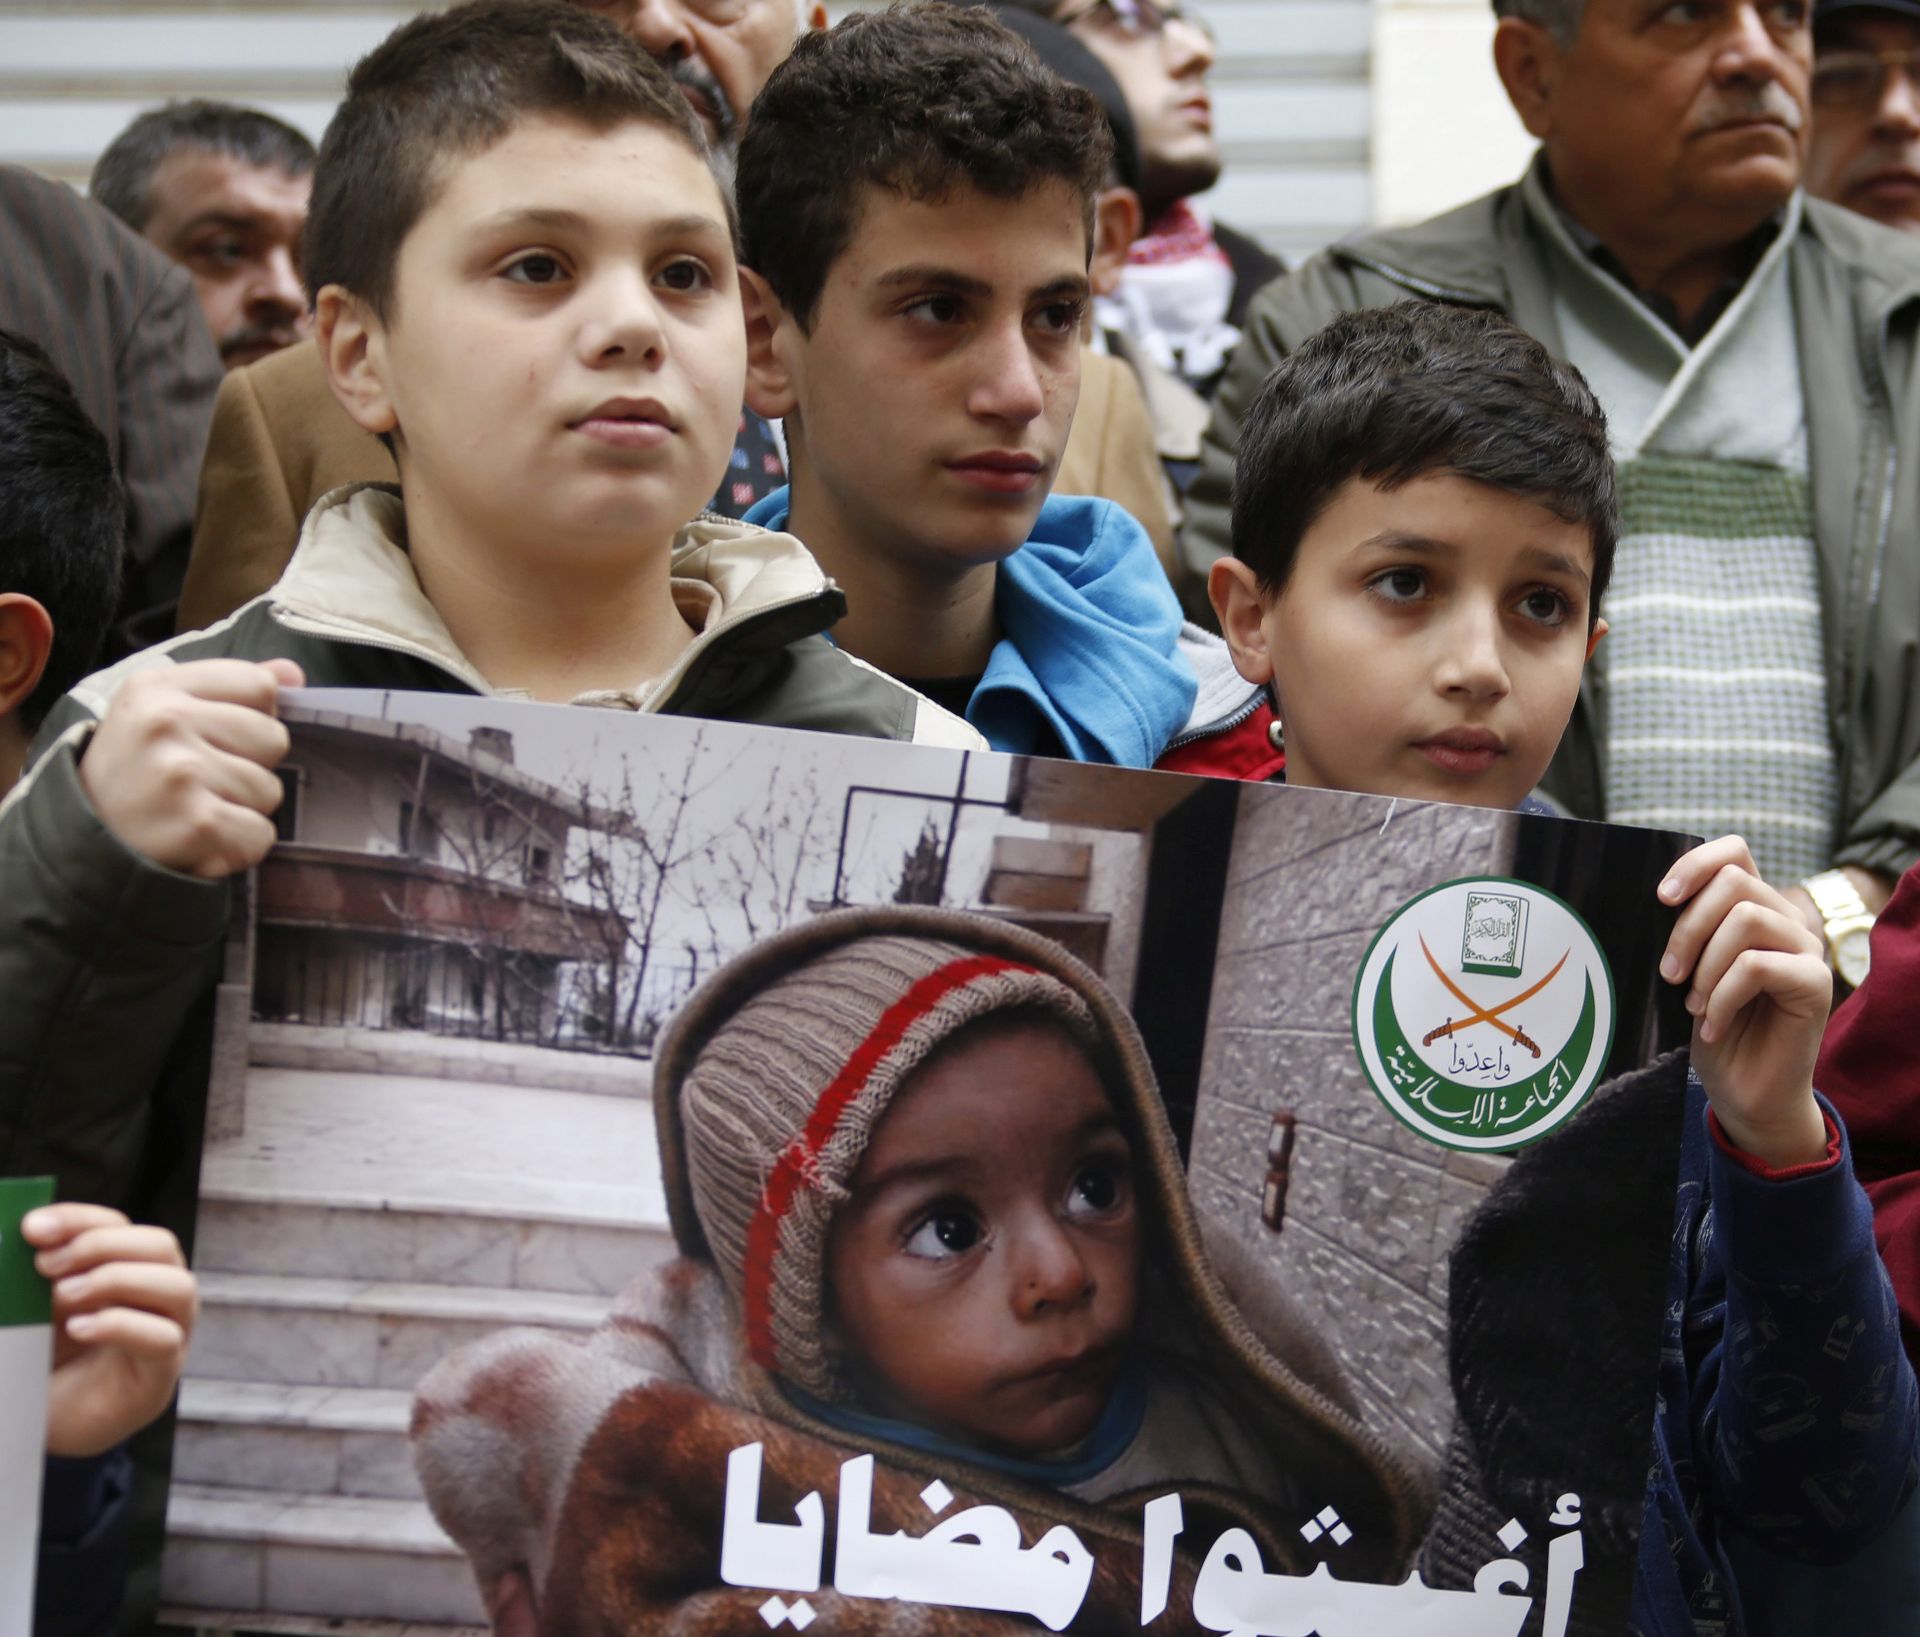 epa05092717 Supporters of Jemaah Islamiyah (Islamic Group) carry a placard depicting pictures believed to be for children from the Syrian town of Madaya and Arabic reading 'Save Madaya' during a protest in front of the International Committee of the Red Cross (ICRC) headquarters in Beirut, Lebanon, 08 January 2016. Aid agencies have received permission from the Syrian government to deliver relief supplies to the three besieged towns, Madaya, Foua and Kefraya, whose residents are reportedly starving, the Red Cross said. Madaya, a rebel-held town about 25 kilometres north-west of the capital, Damascus, has been under siege since July by forces loyal to Syrian President Bashar al-Assad, aided by fighters from the allied Lebanese Hezbollah movement.  EPA/NABIL MOUNZER